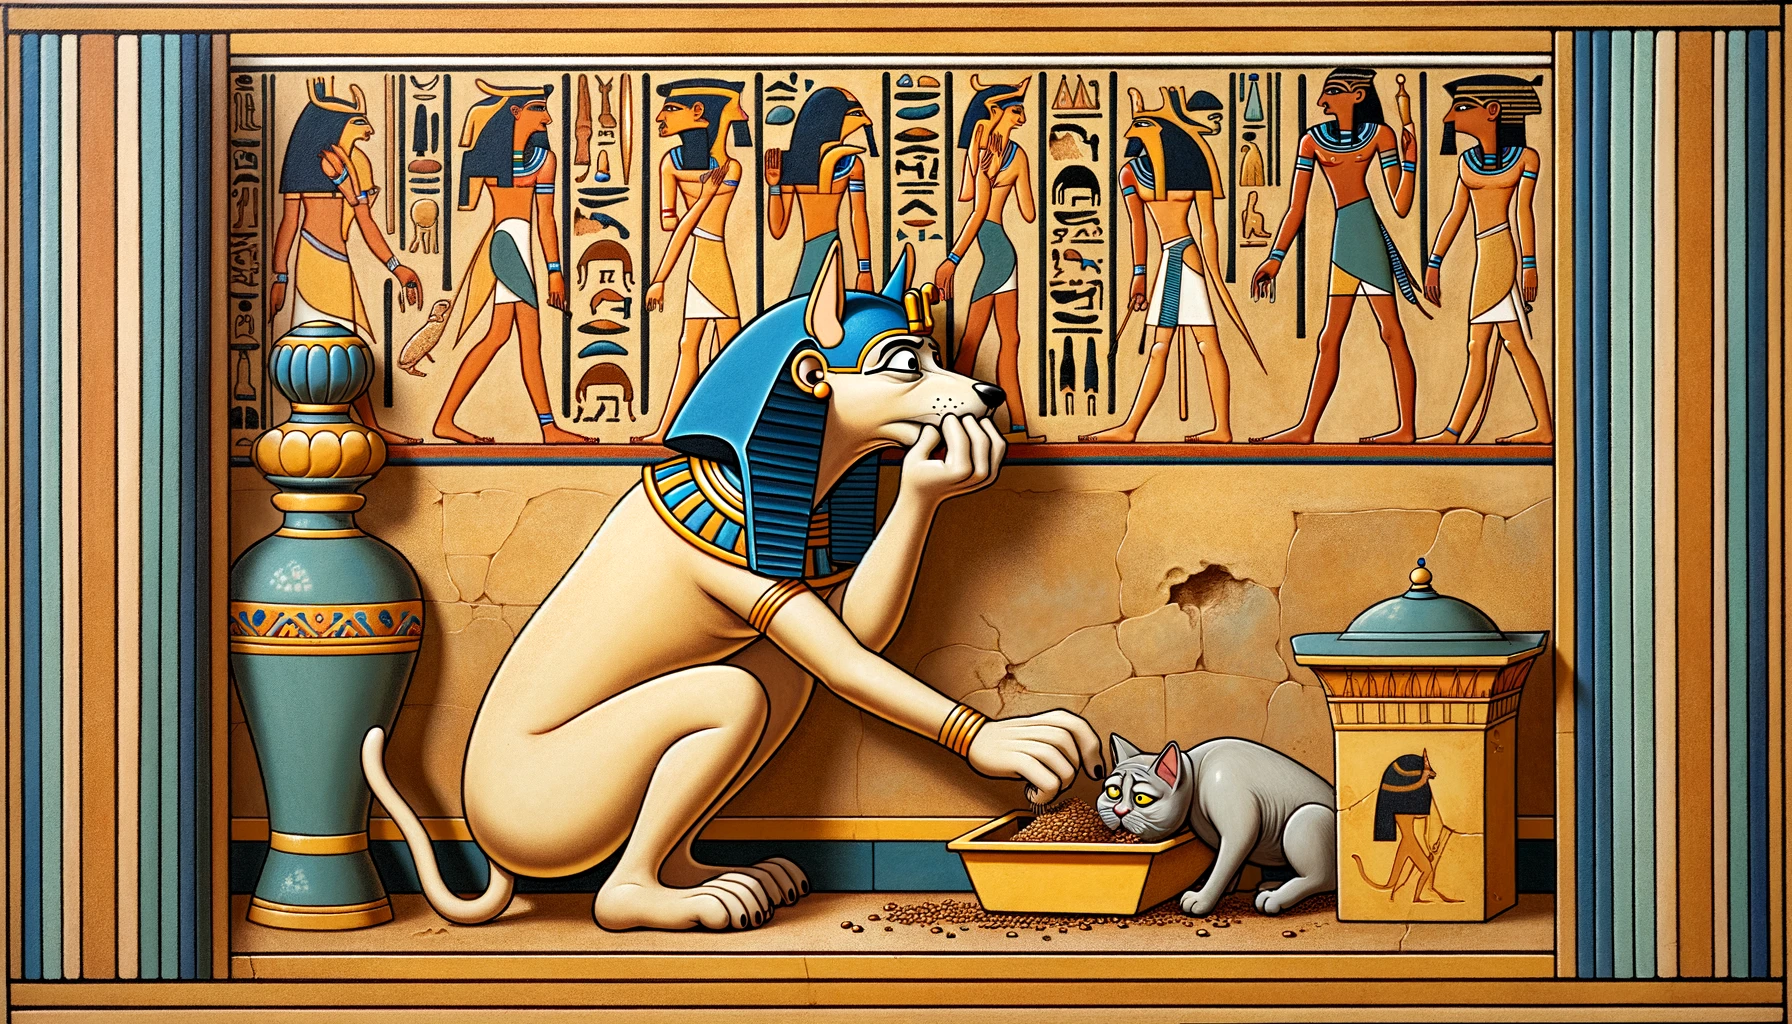 Dog discreetly eating from a cat's litter box in Egyptian Ptolemaic art style.